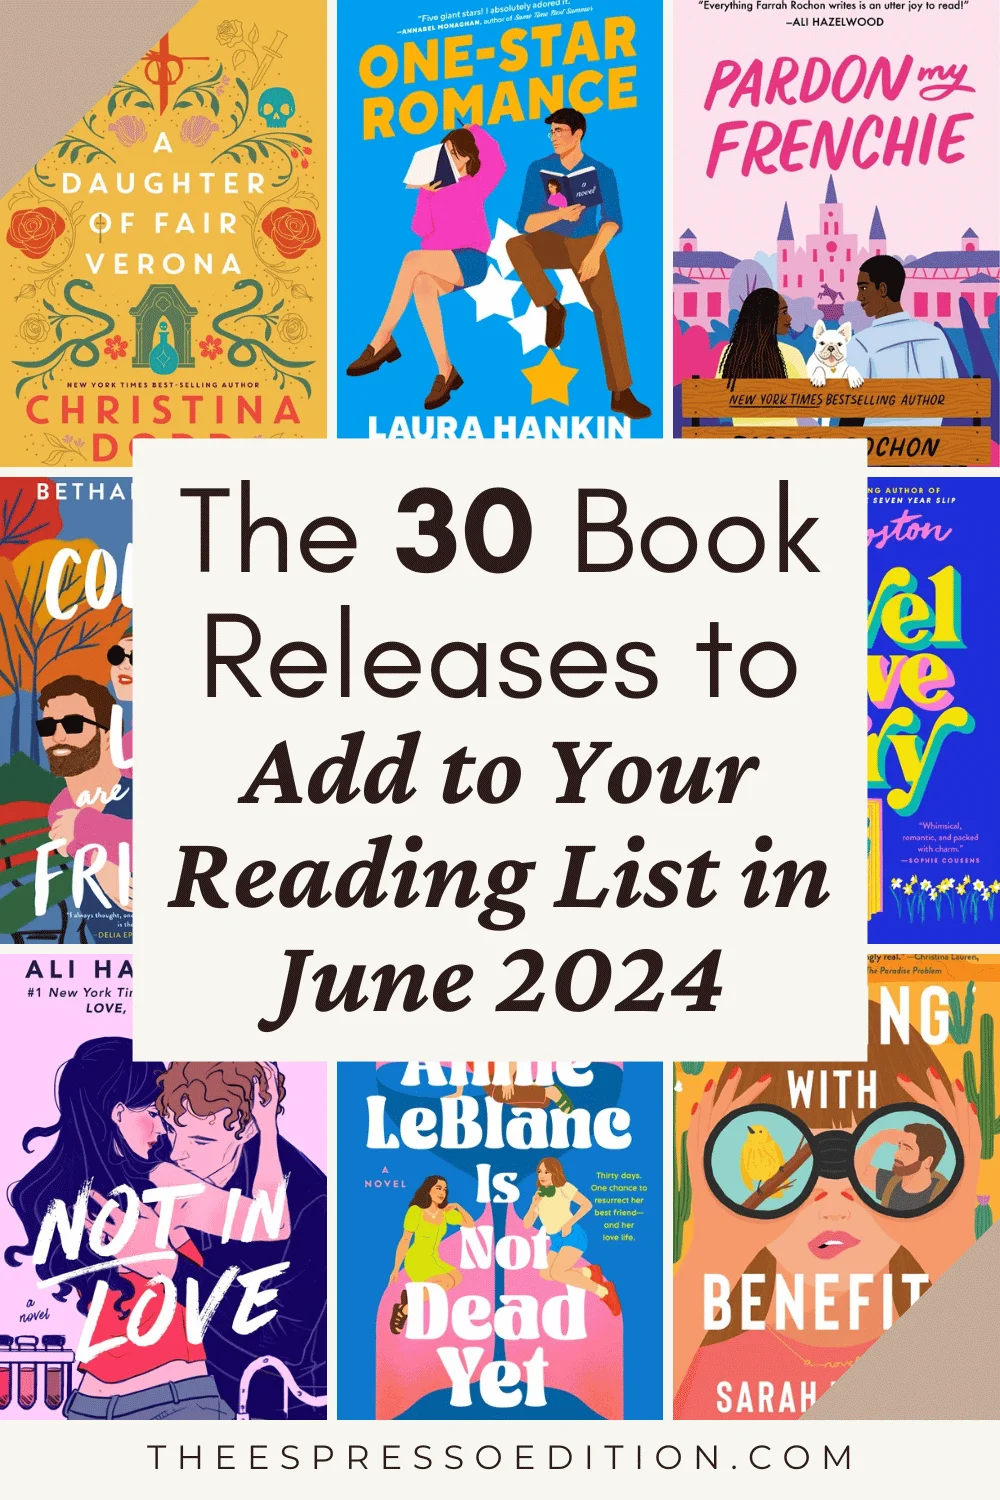 The 30 Book Releases to Add to Your Reading List in June 2024 by The Espresso Edition cozy bookish blog